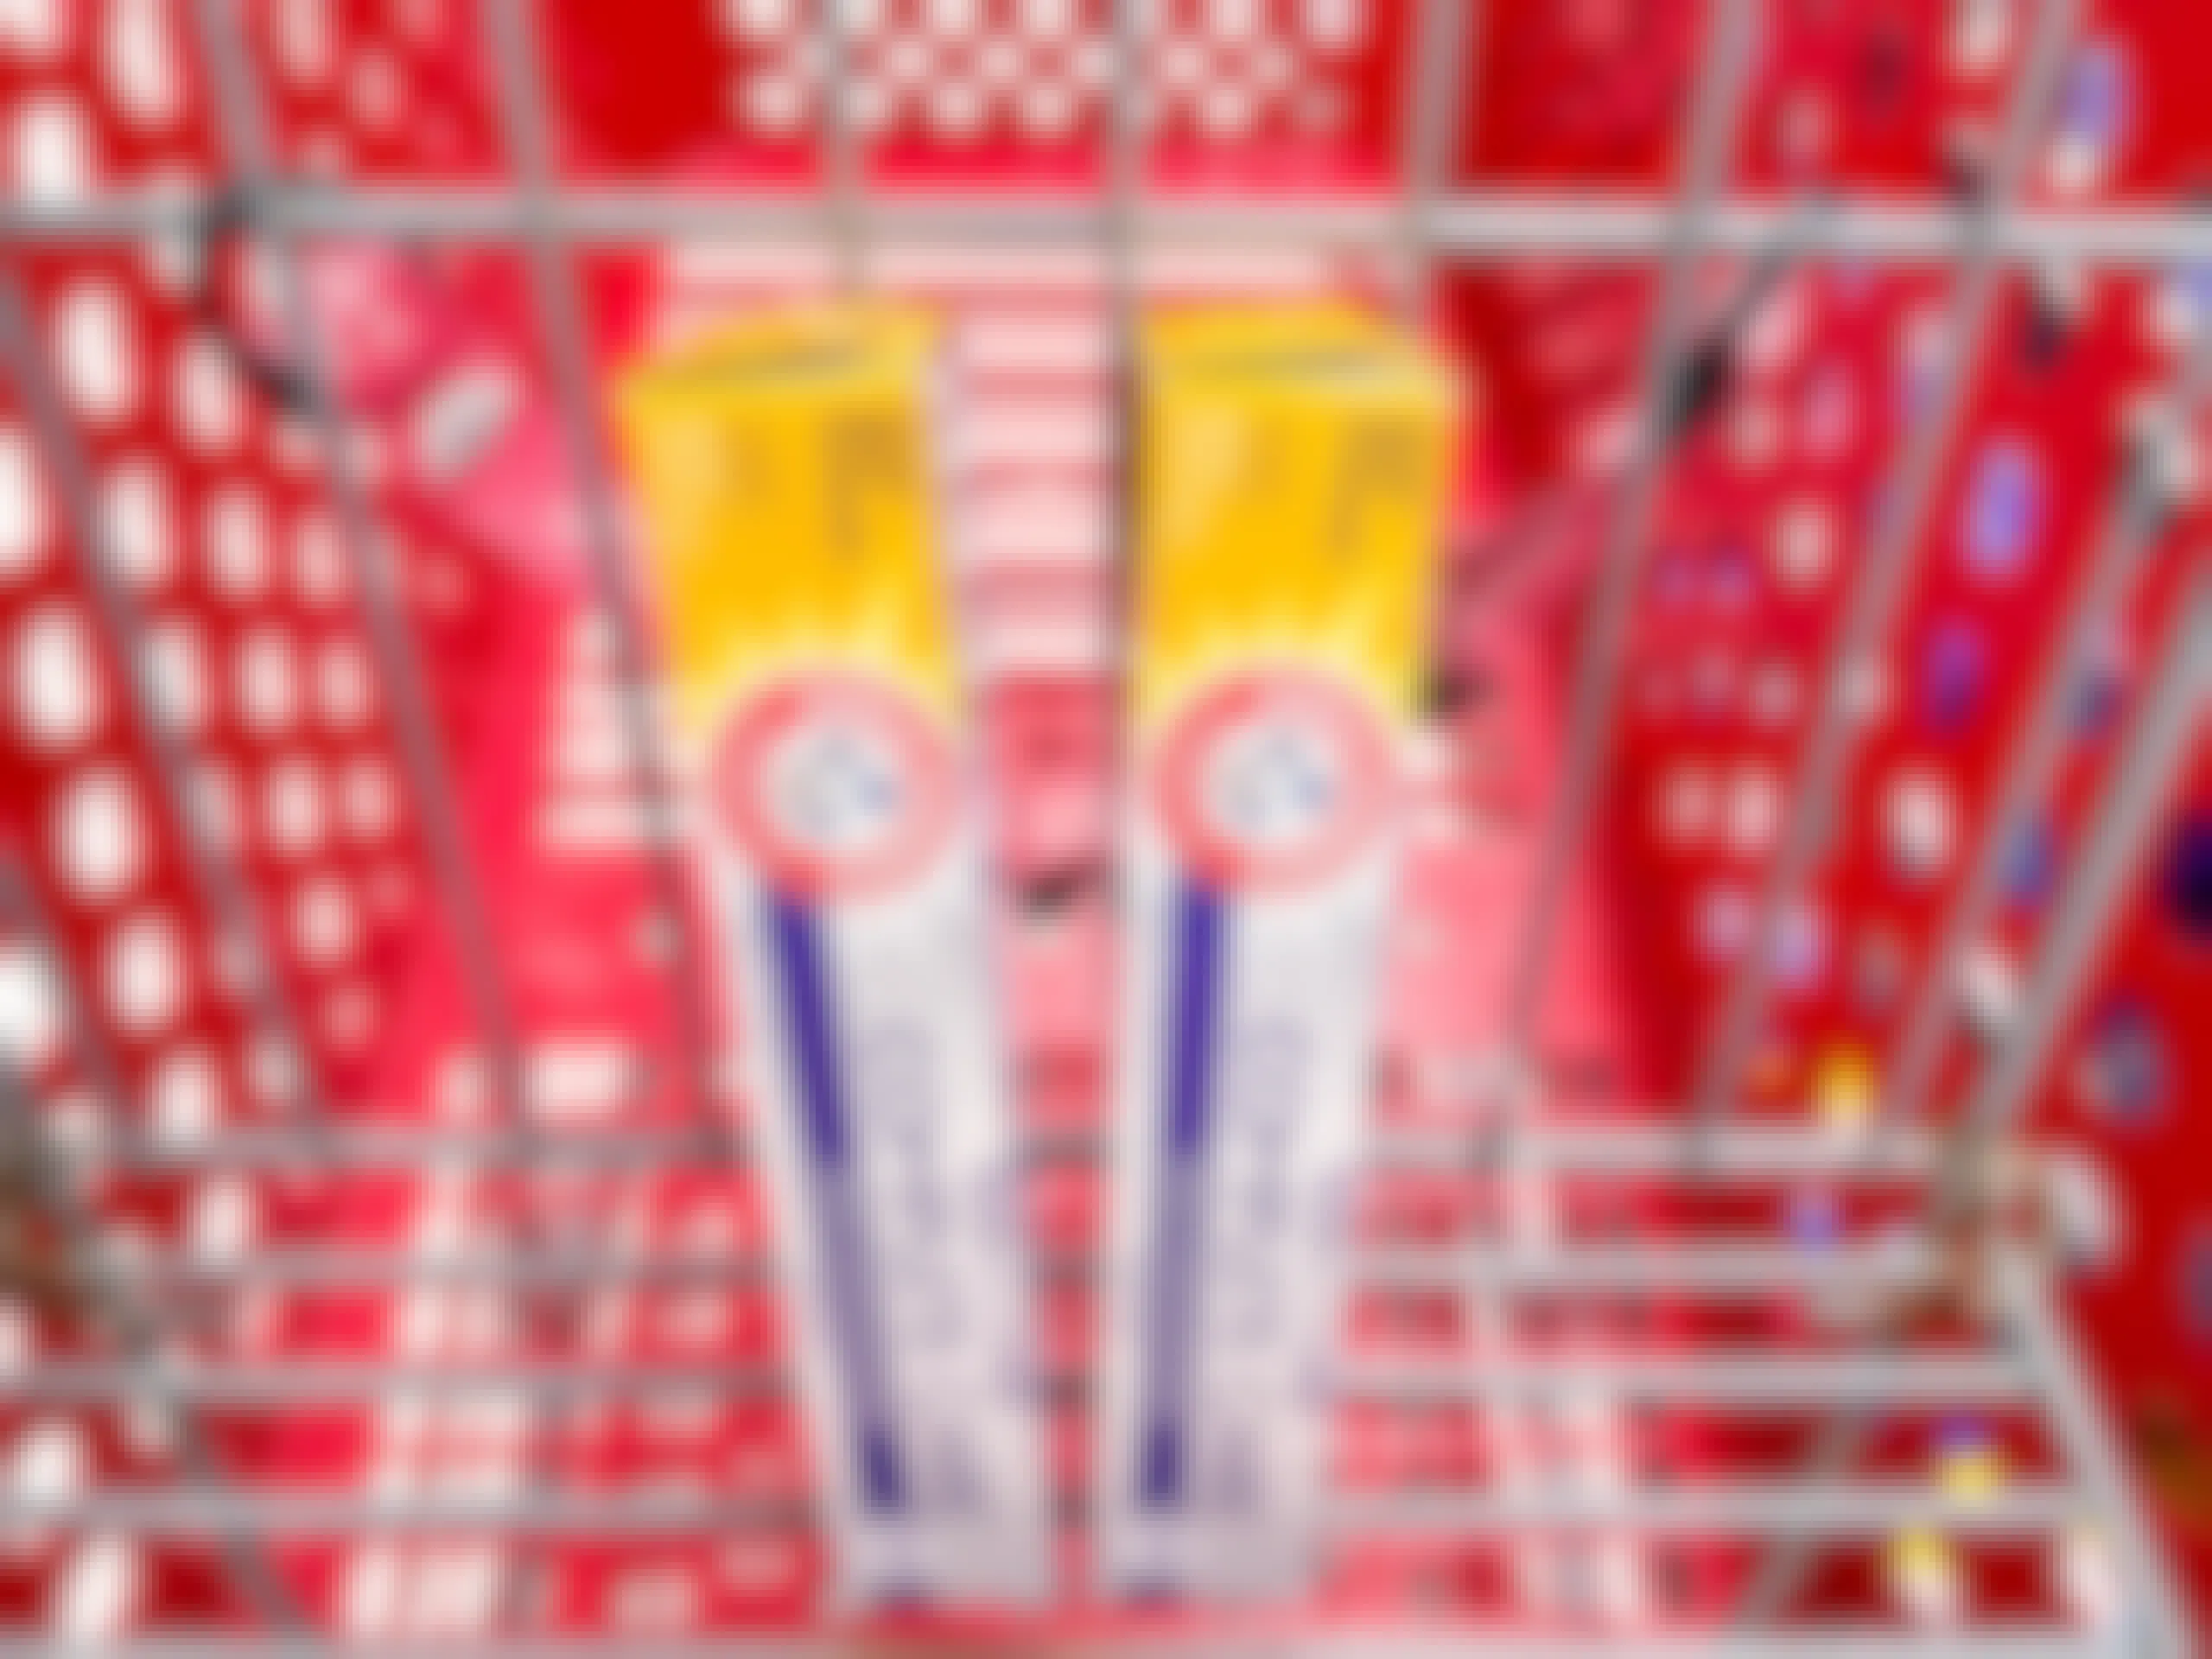 arm & hammer complete care toothpaste in a target cart